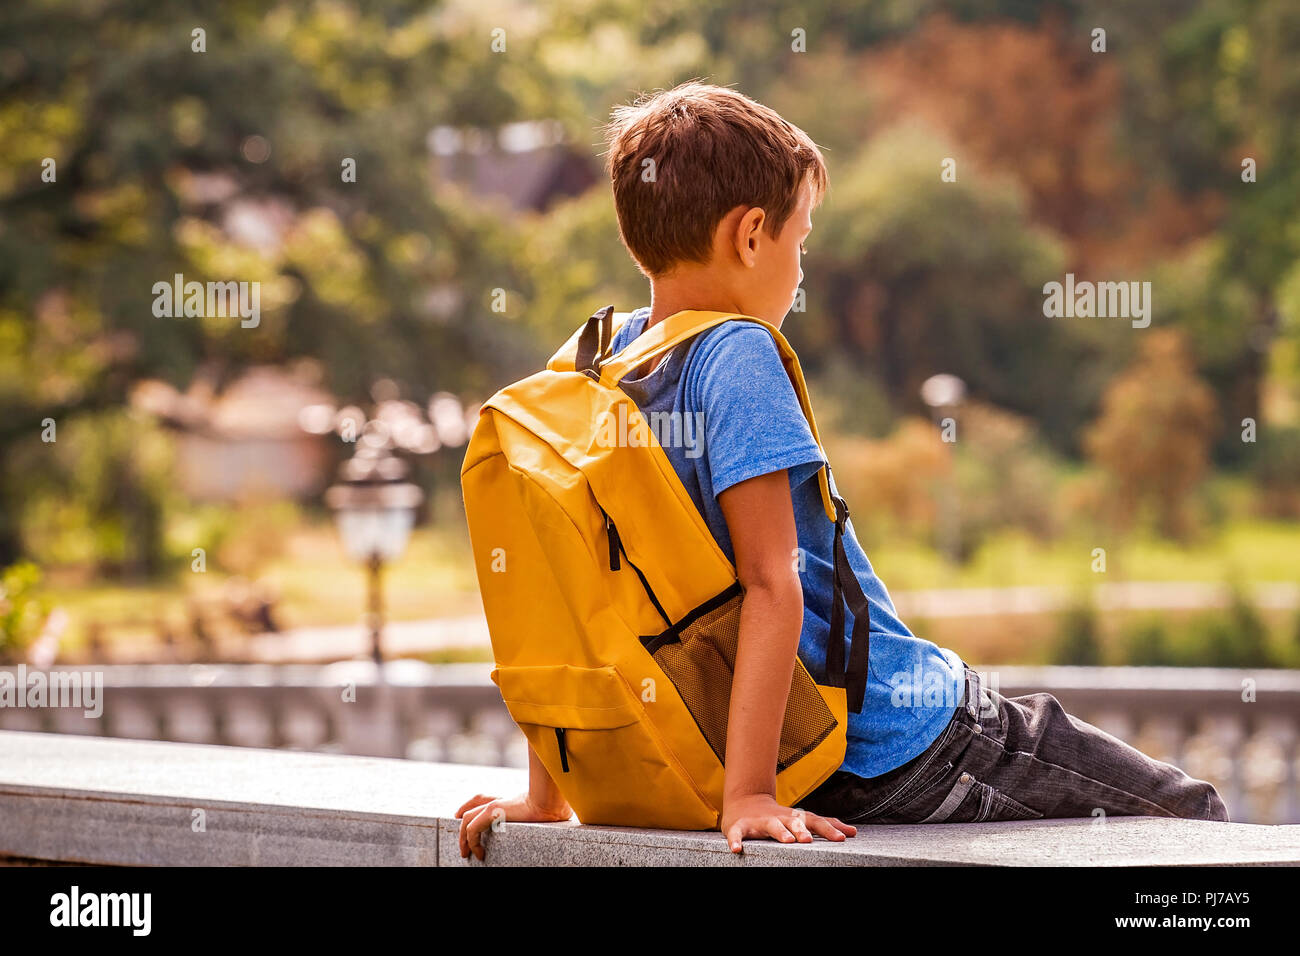 Sad alone boy sitting in the park outdoors Stock Photo - Alamy